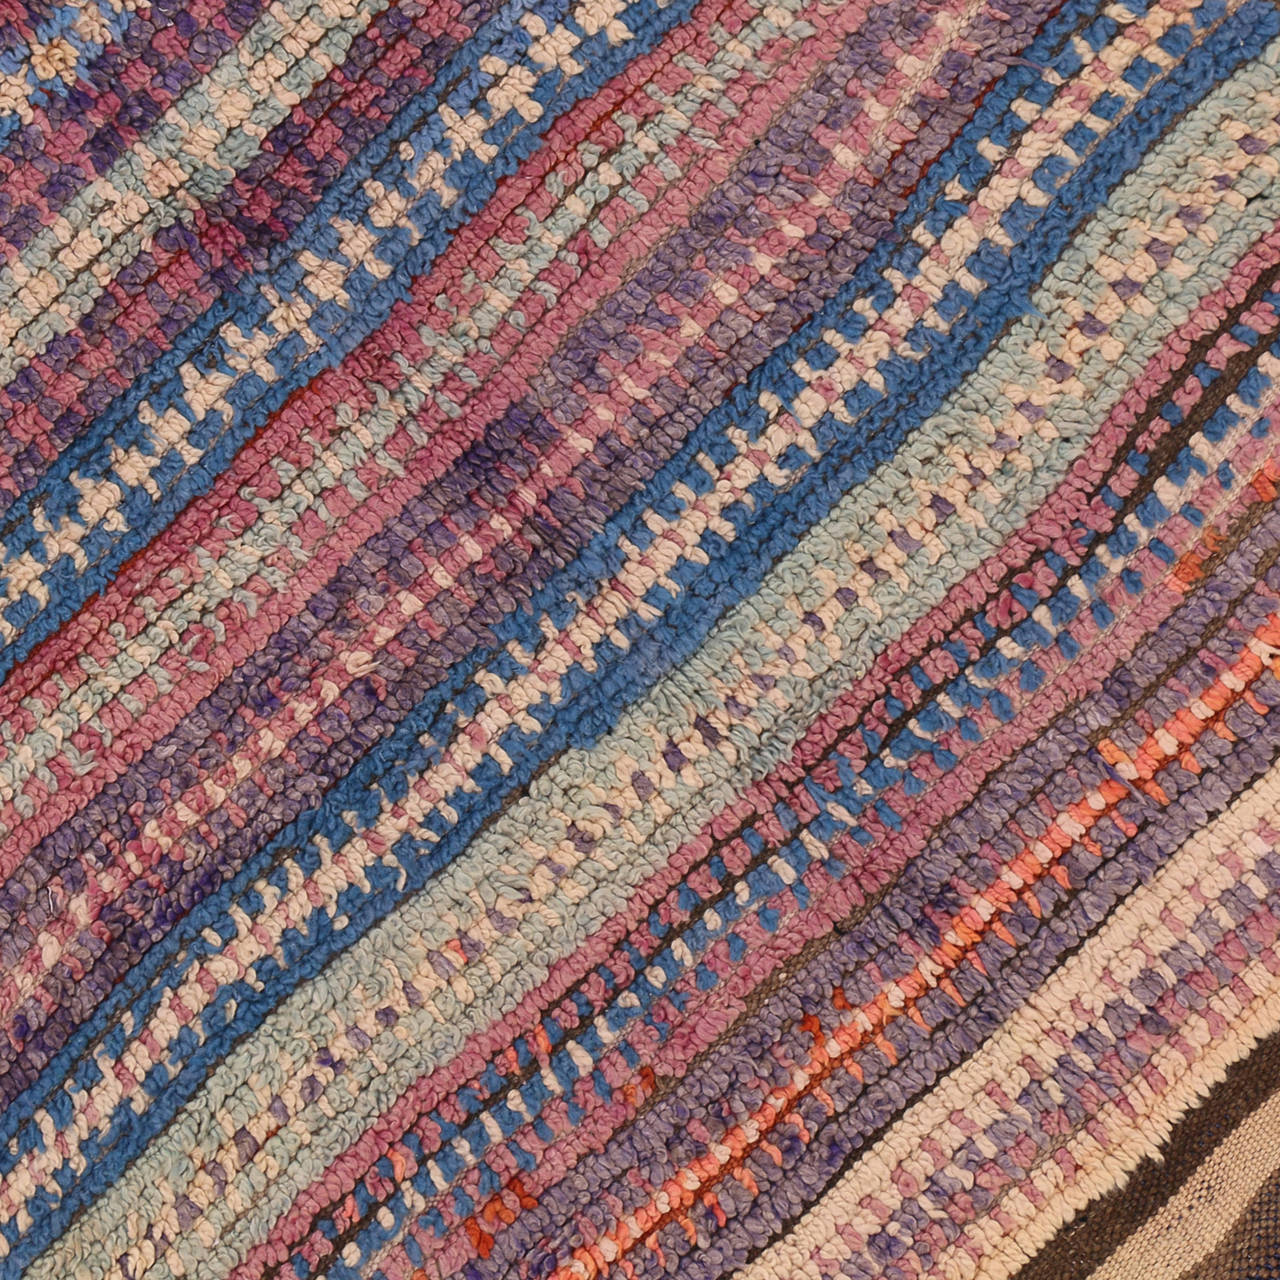 Hand-Knotted Mid-Century Modern Vintage Berber Moroccan Rug in Pastel Colors